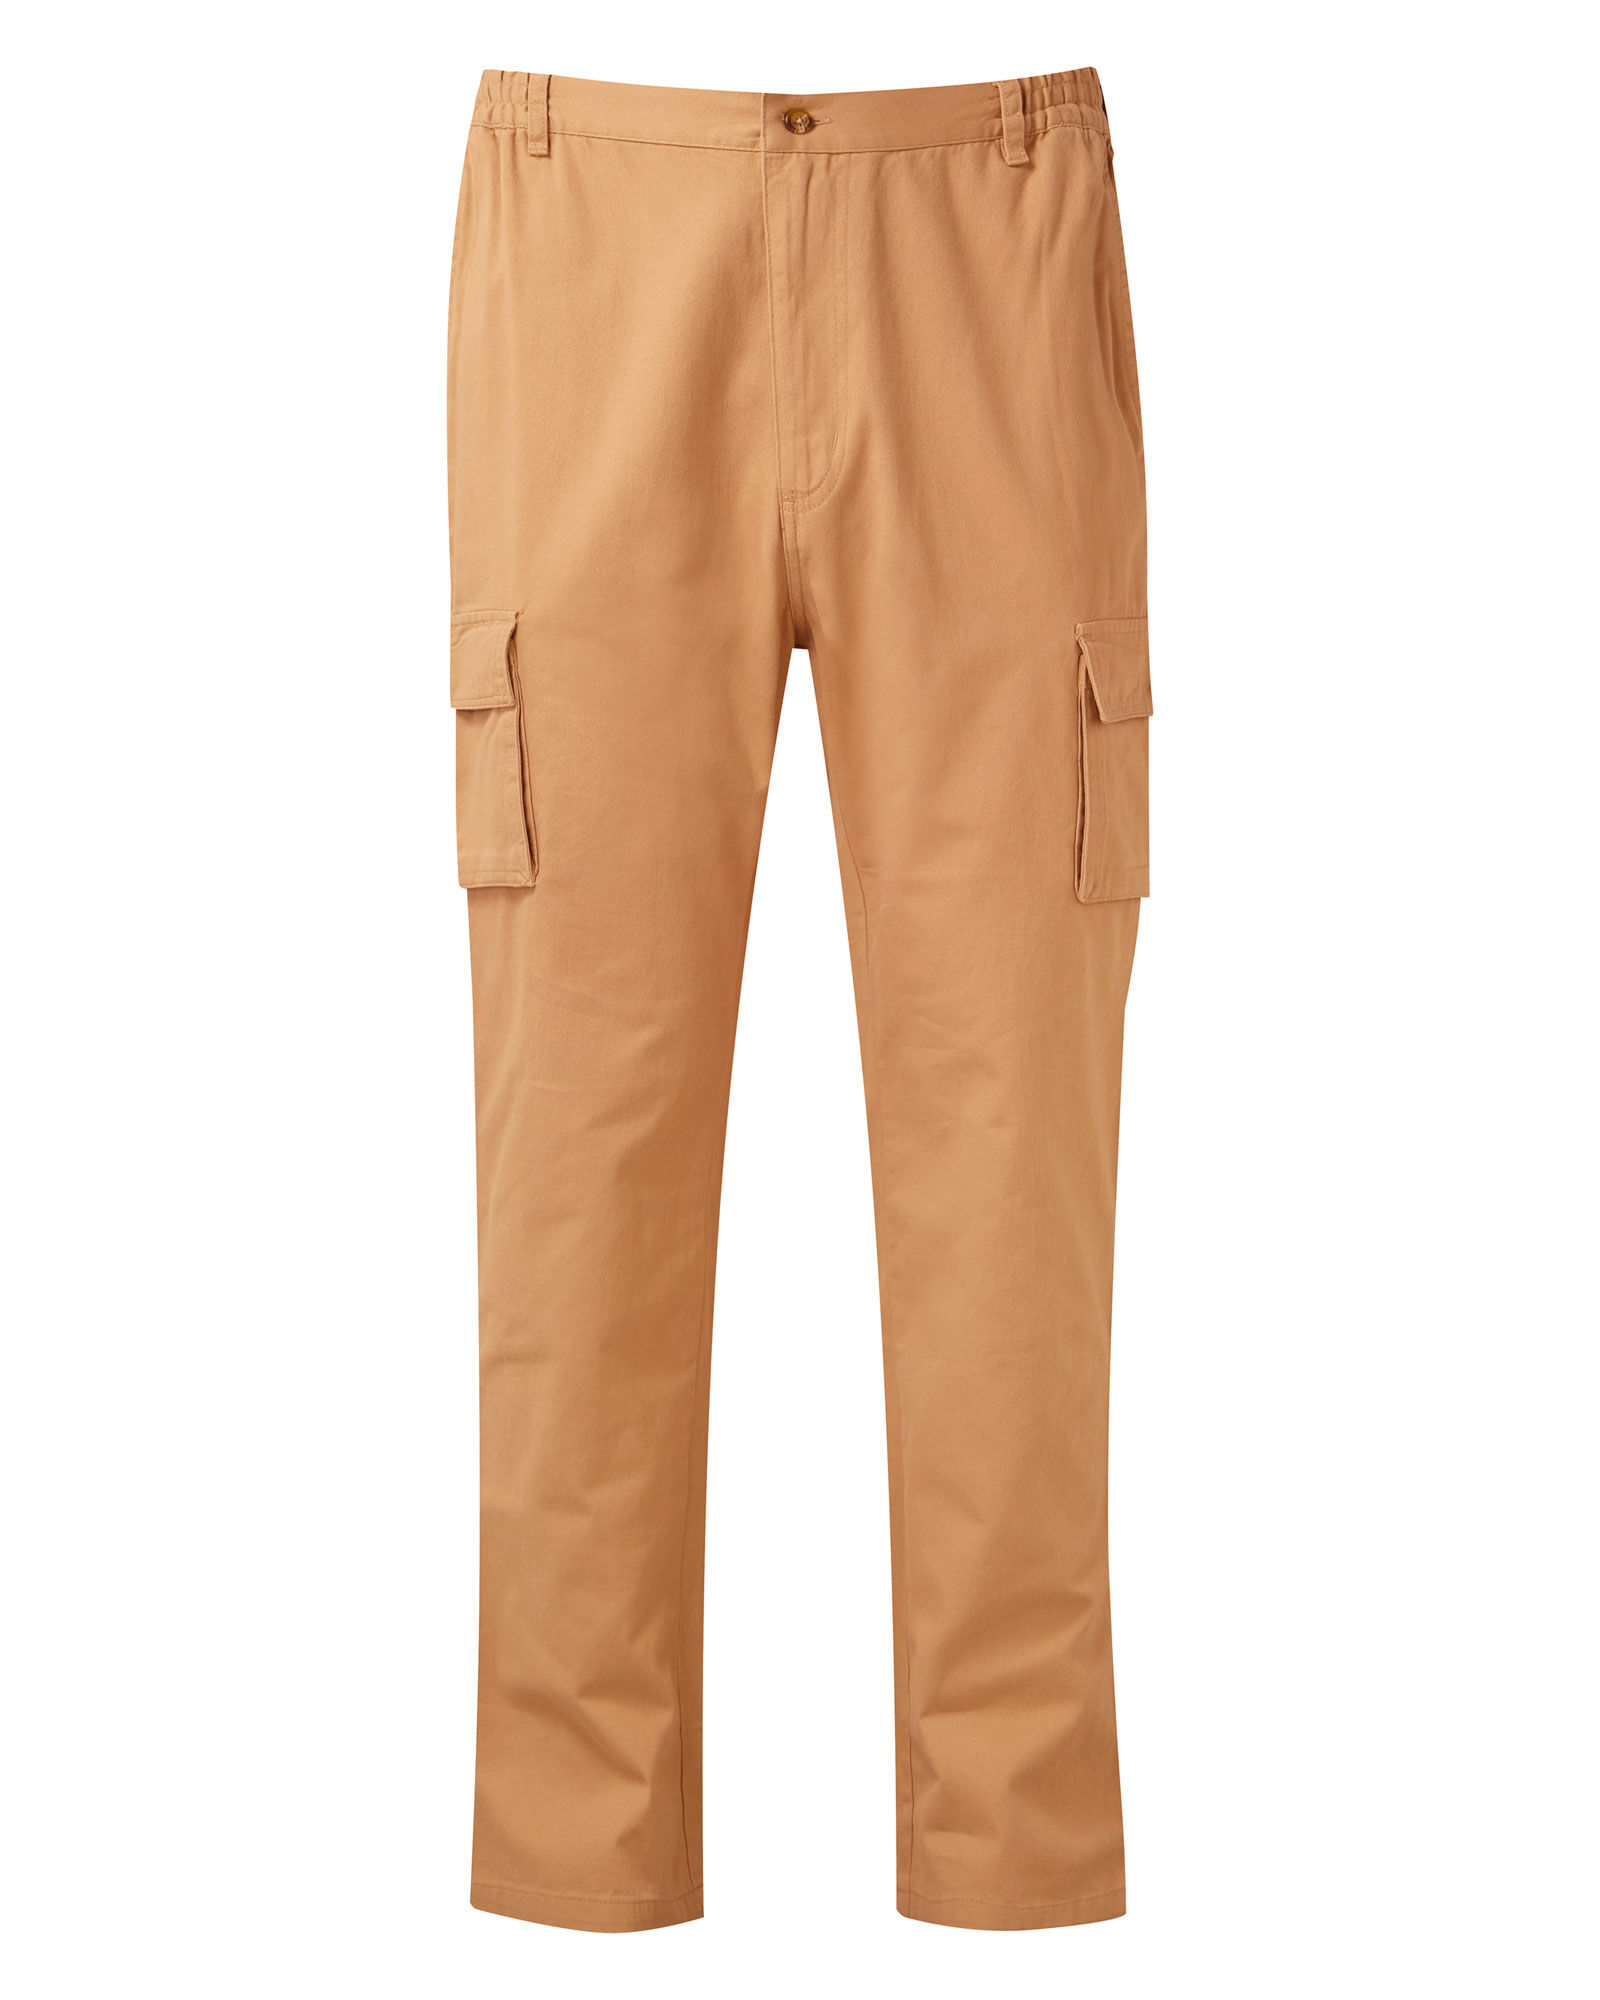 cotton traders cargo pants